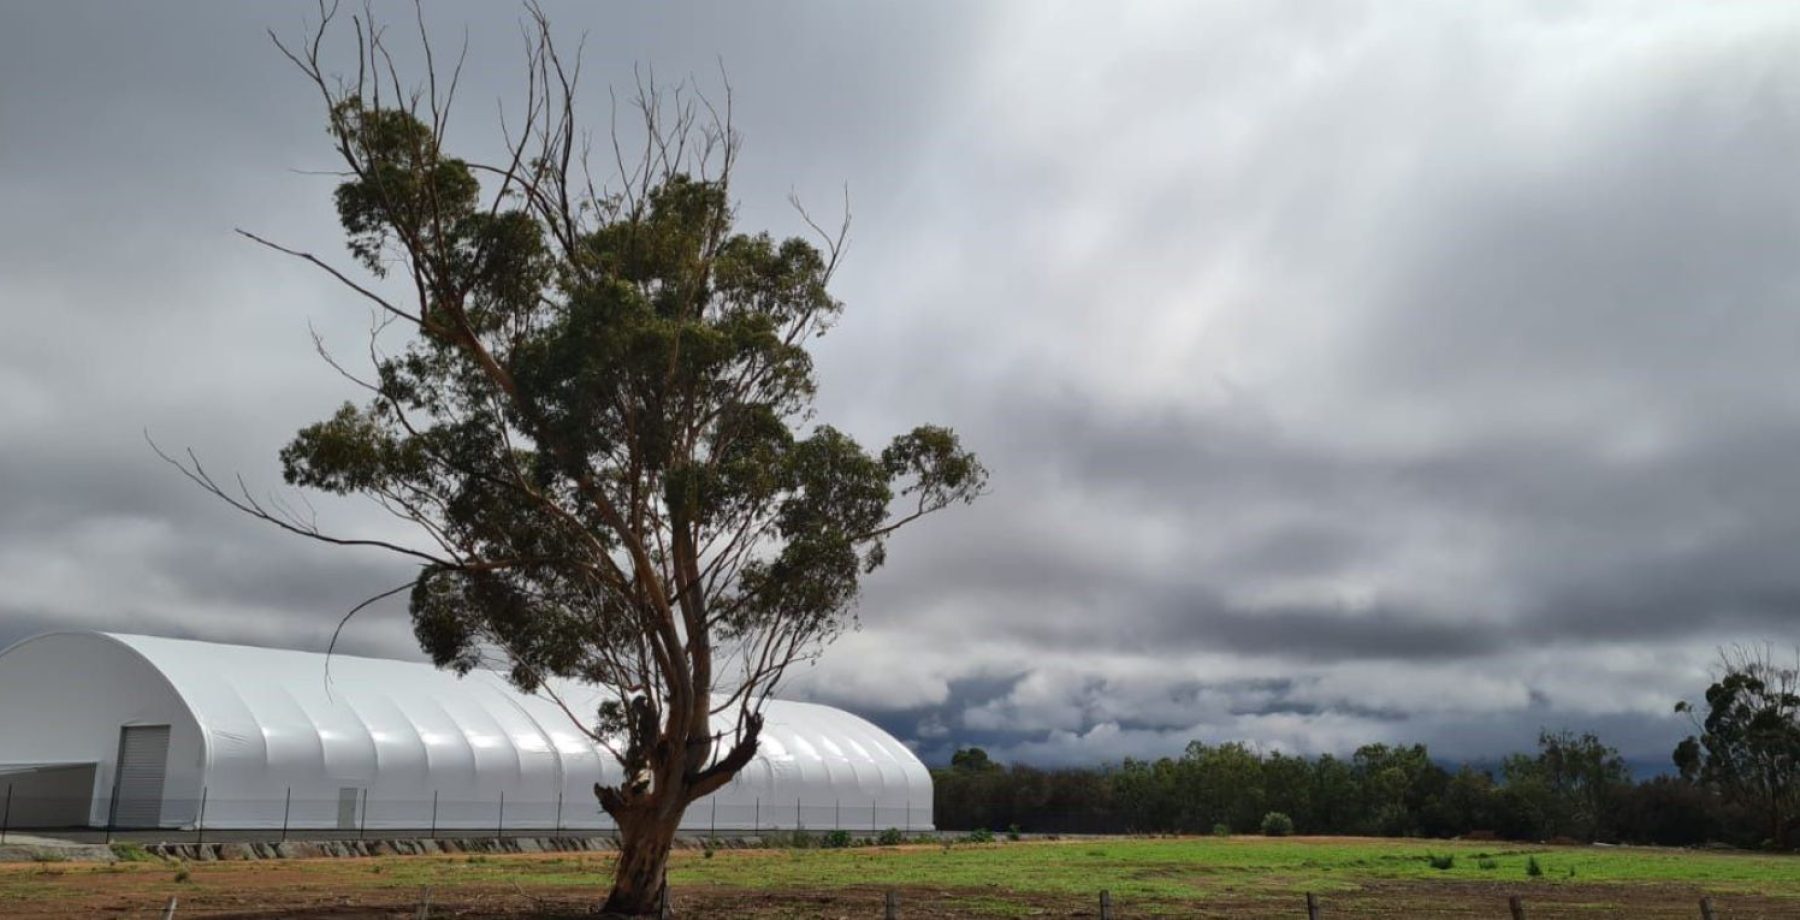 Fabric Shelters and the updated Australian wind code standards